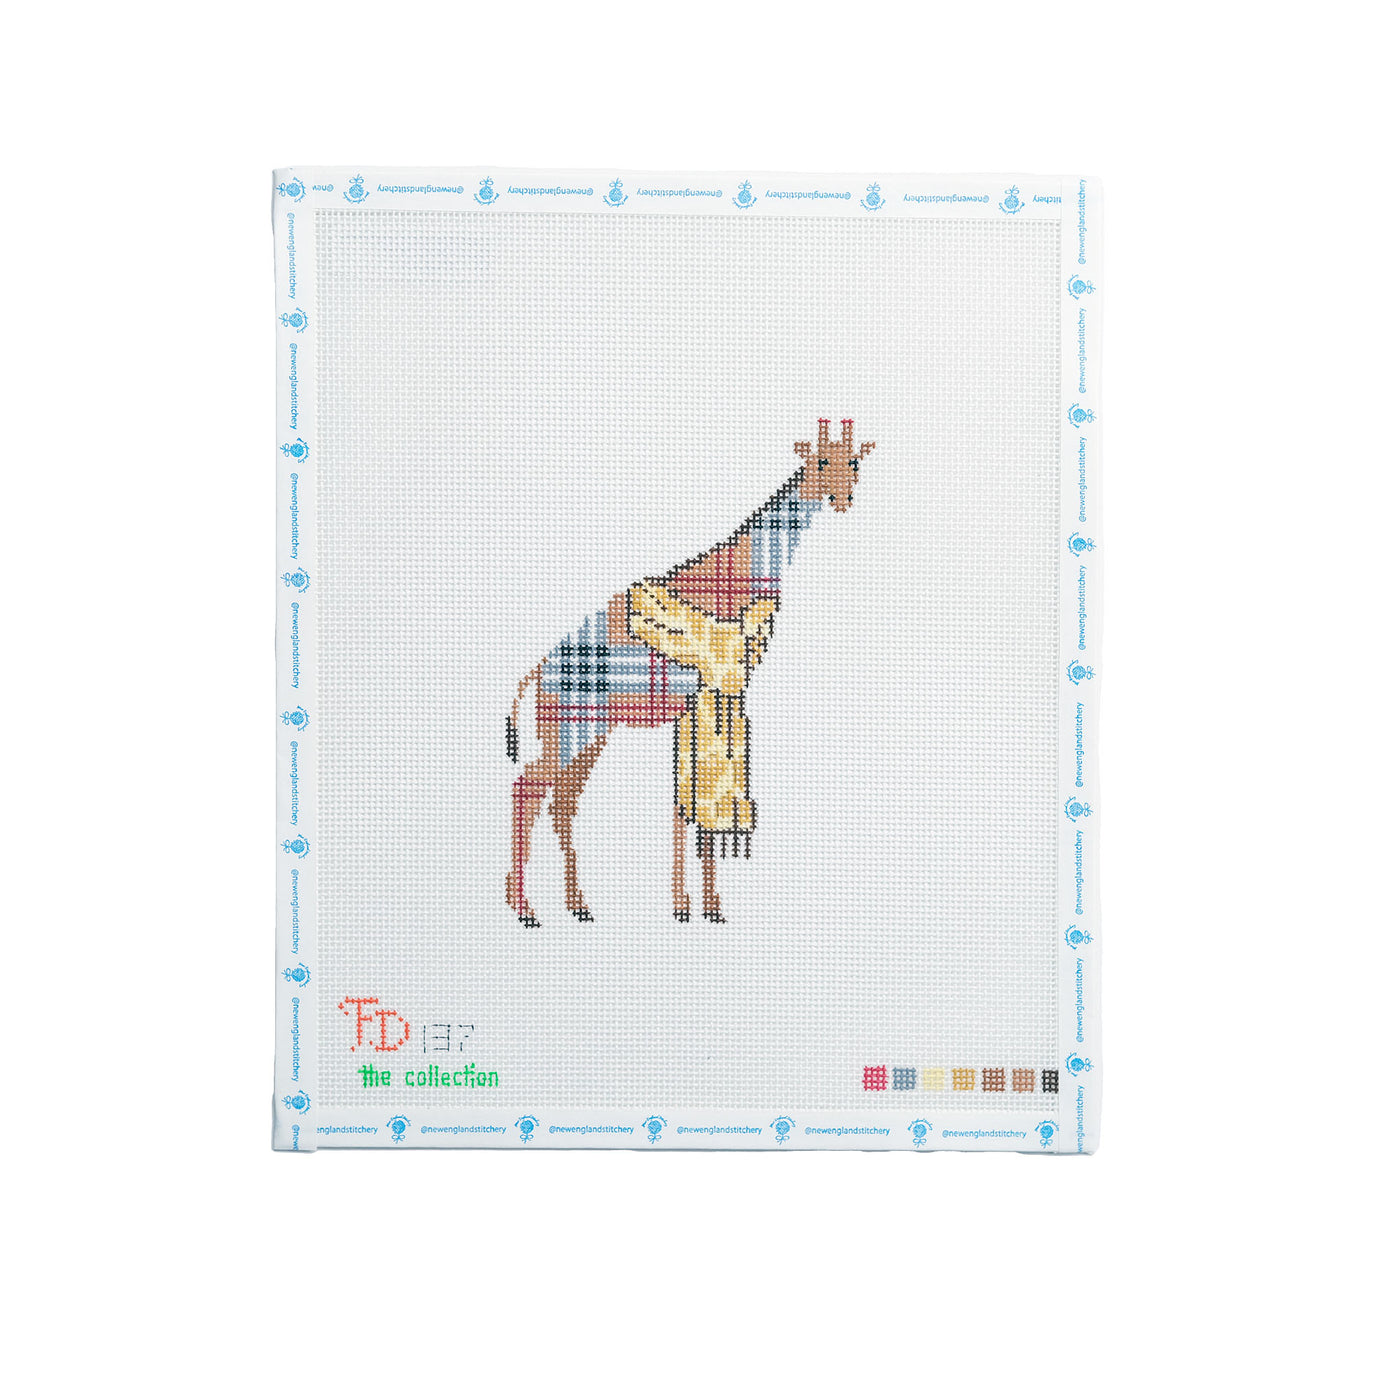 Plaid Giraffe in Spotted Scarf